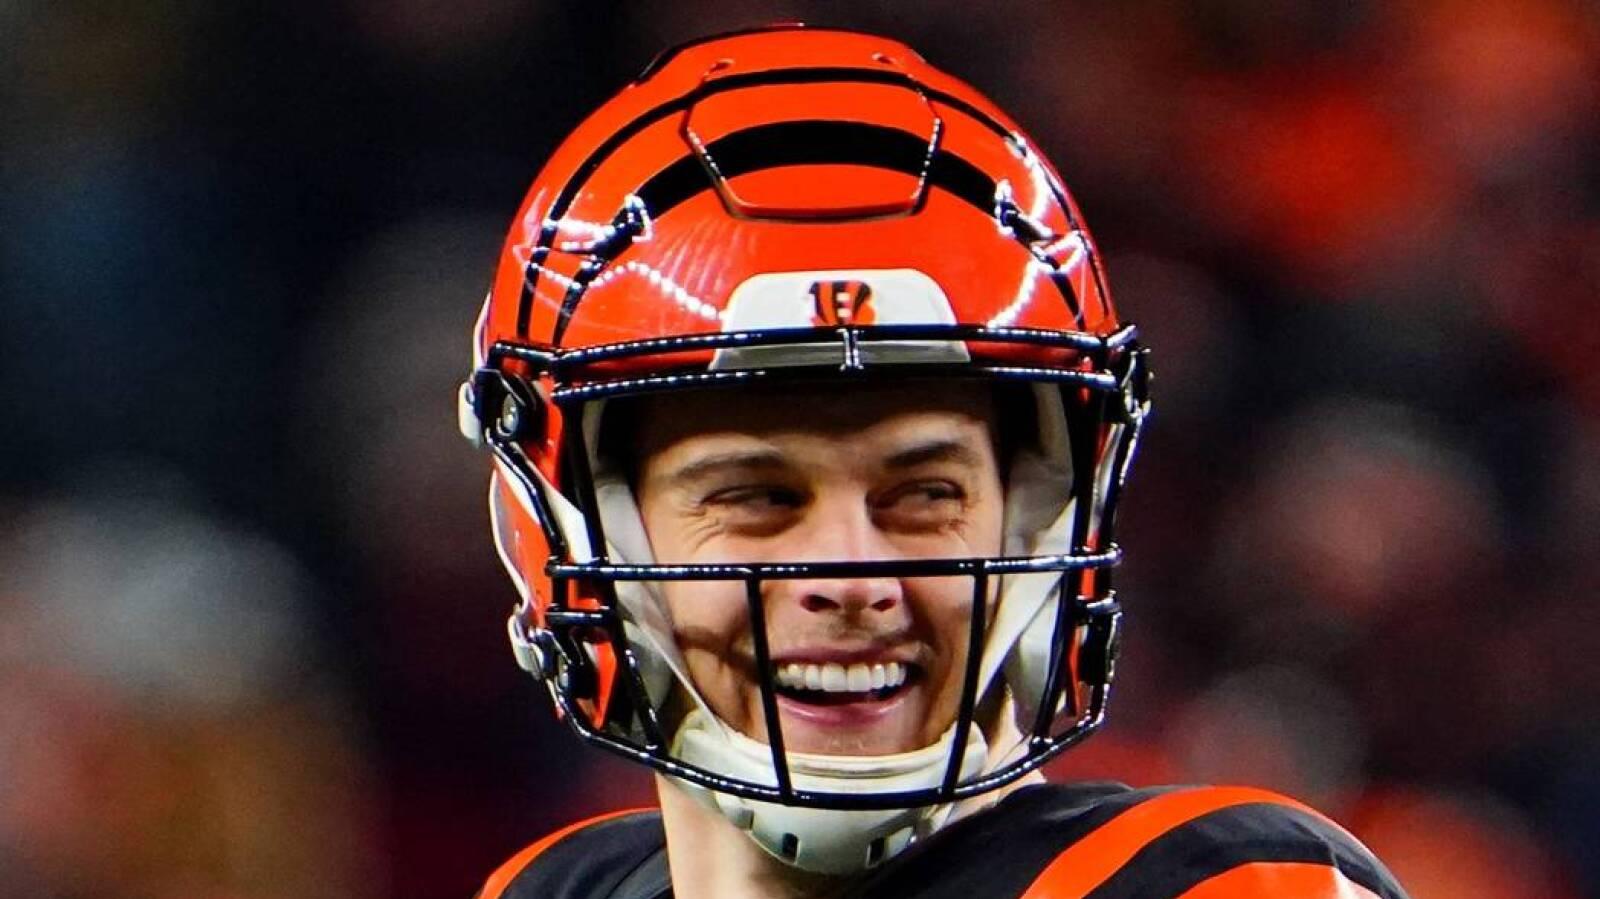 OBJ Bengals QB Joe Burrow is going to be one of the greats